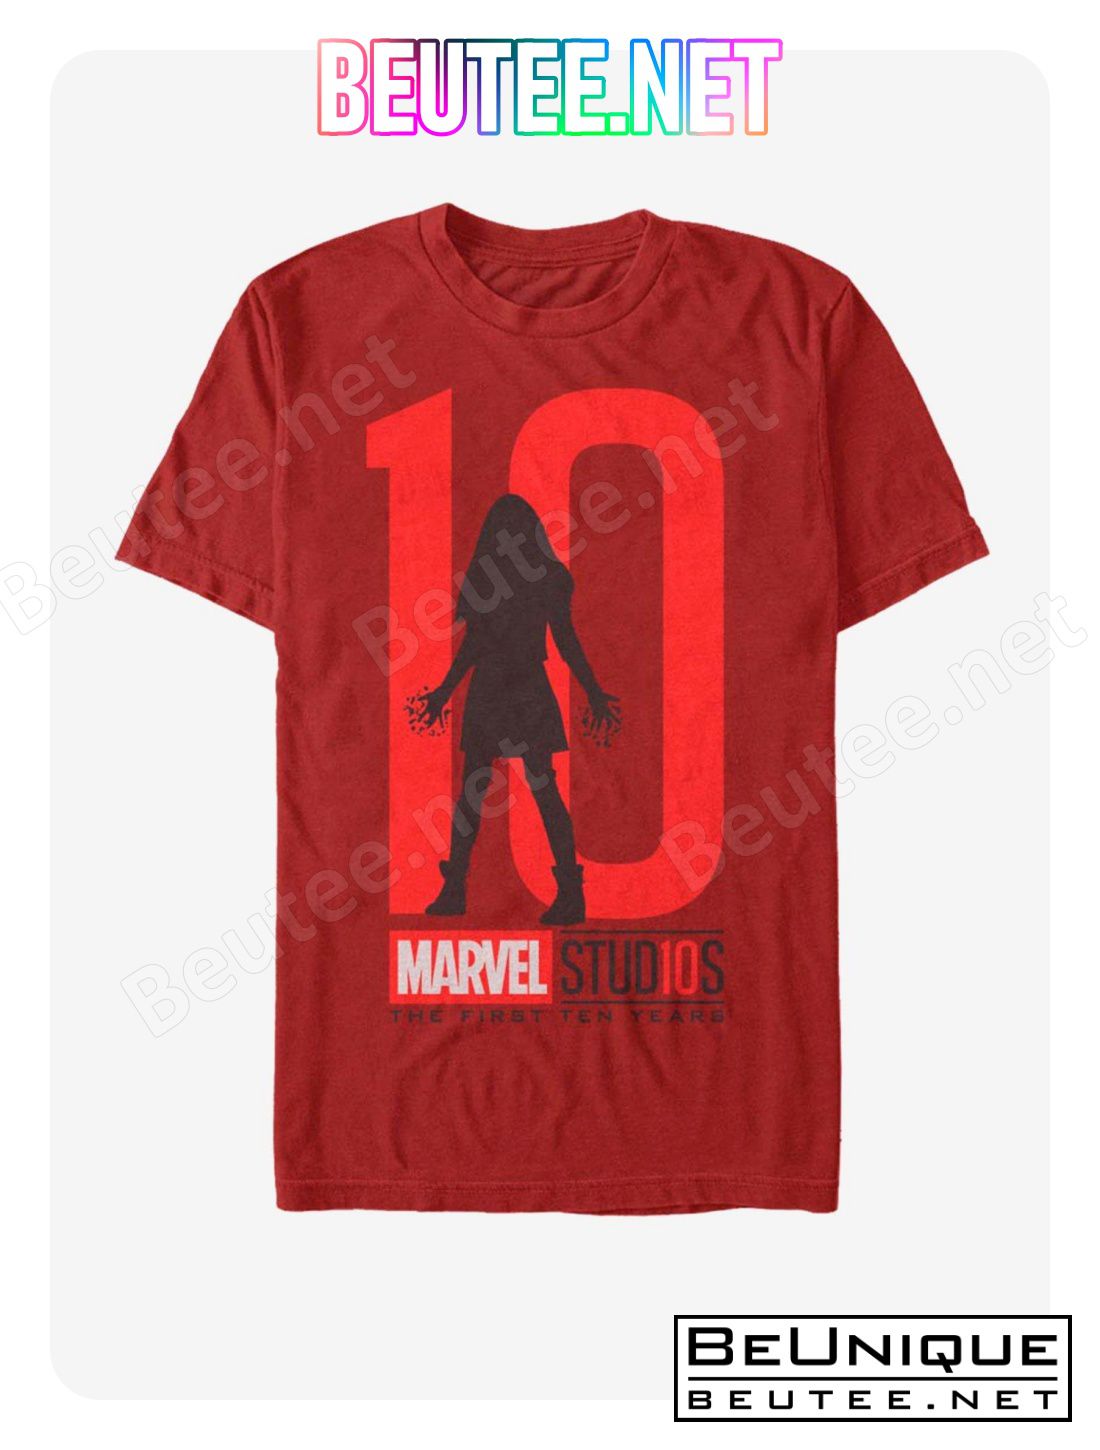 Marvel 10 Anniversary Scarlet Witch T-Shirt